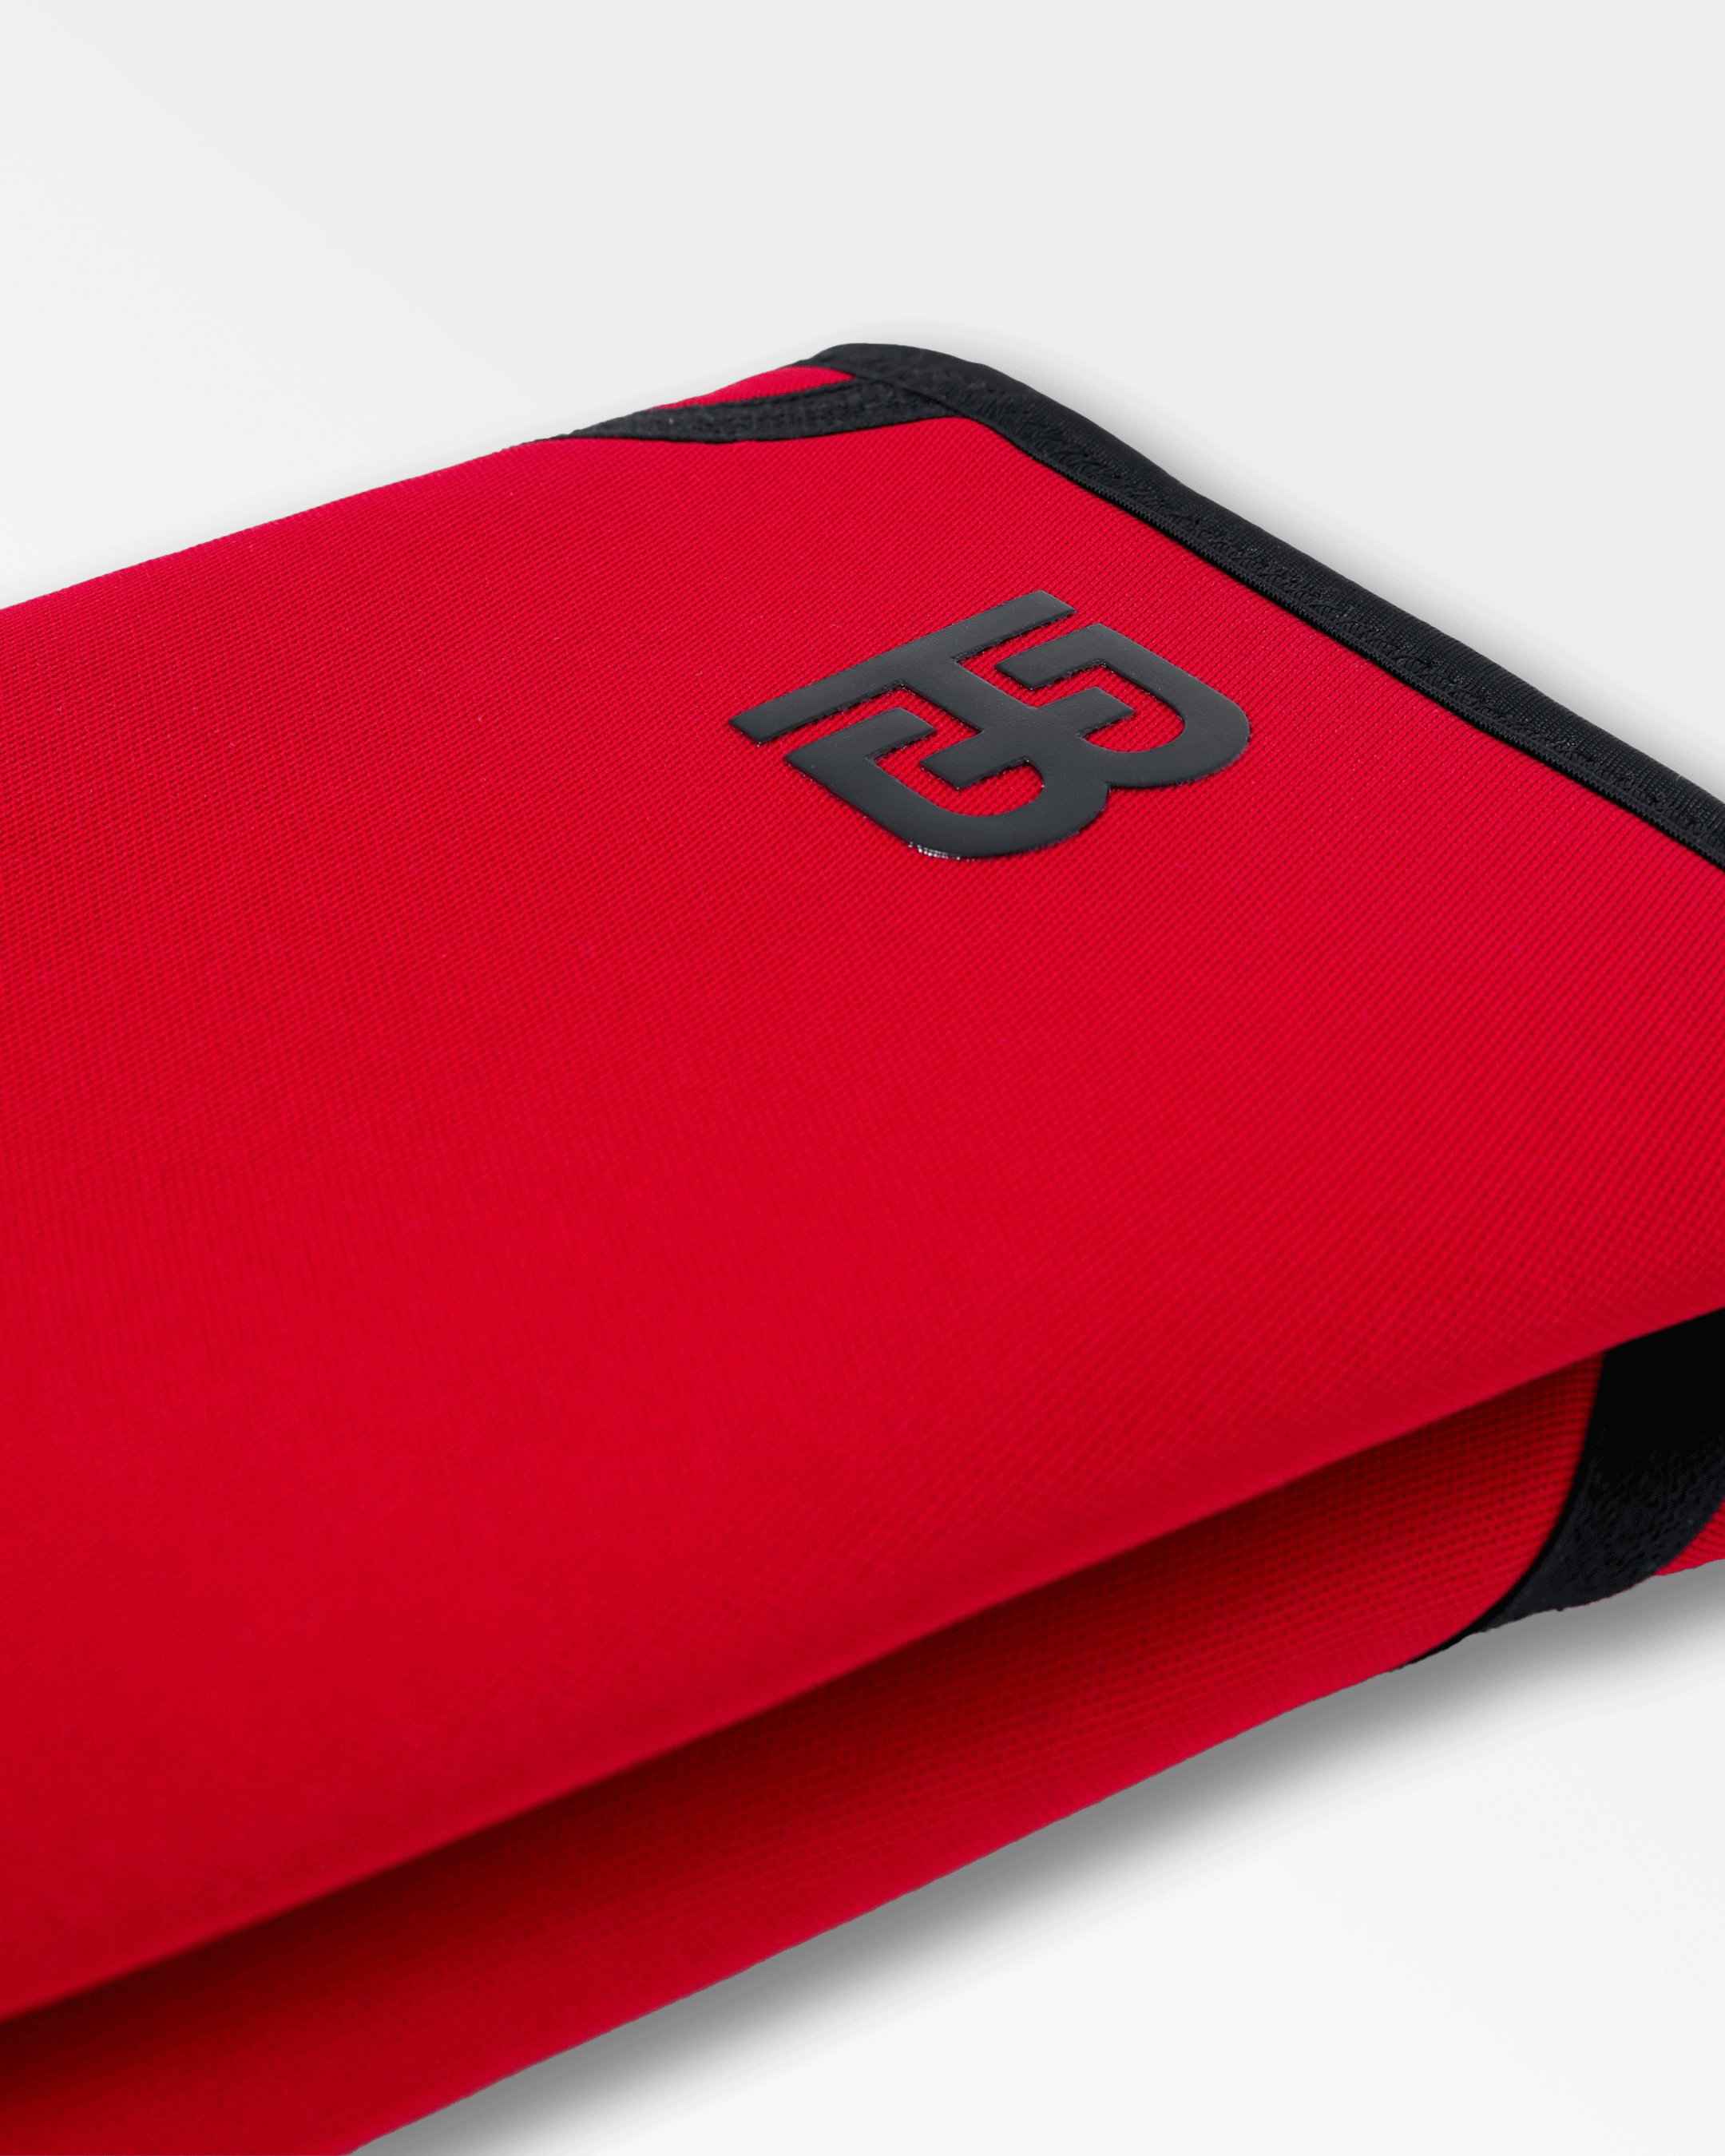 Classic Red V2 Knee Sleeve 7mm